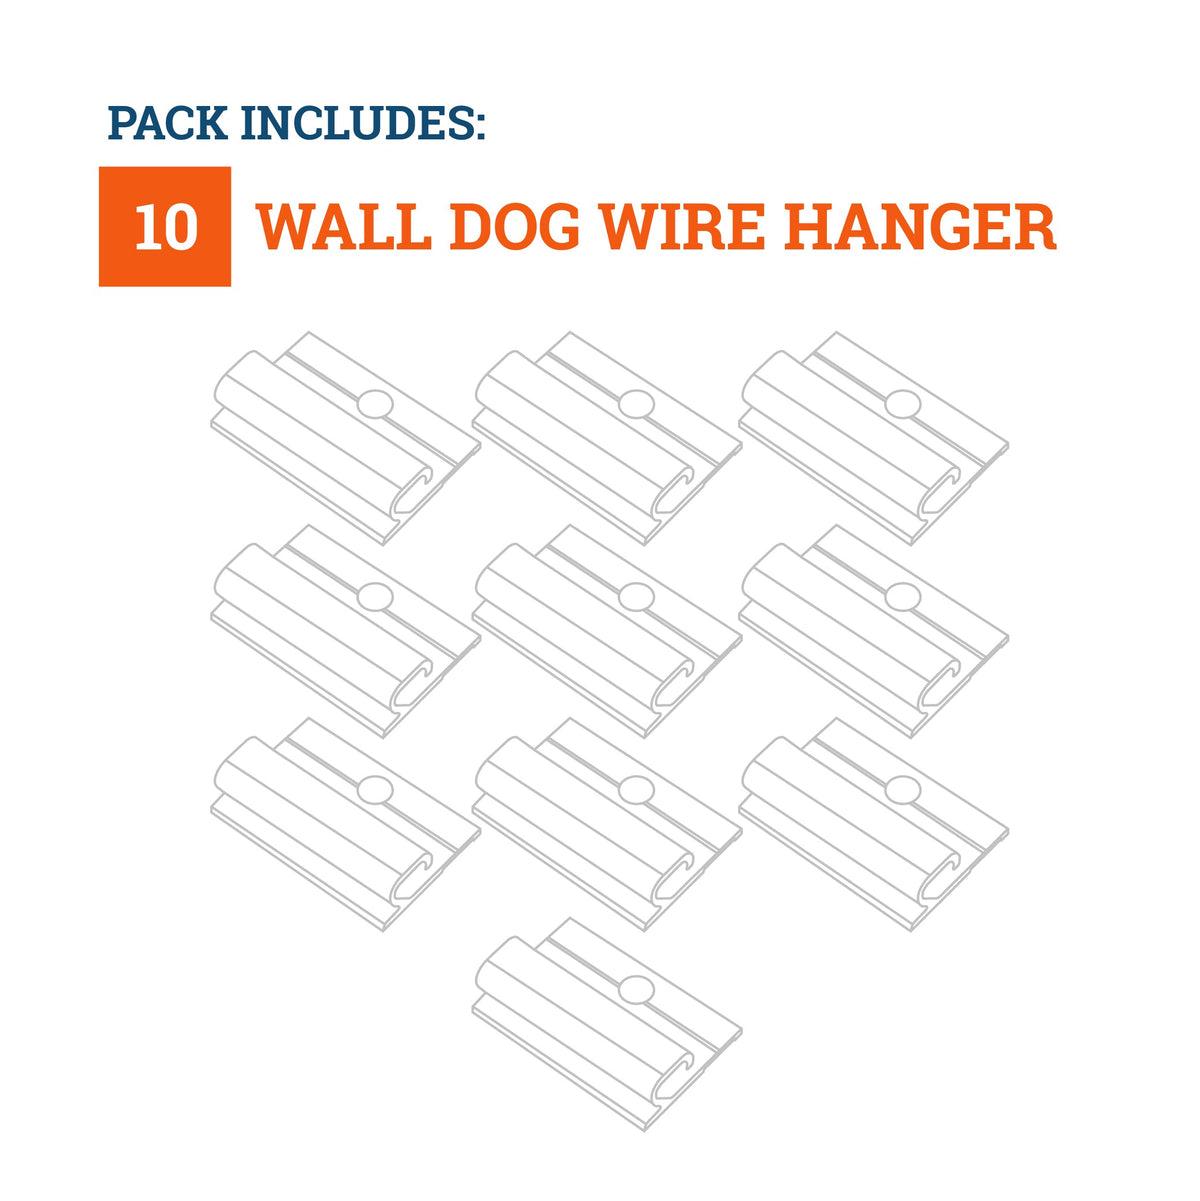 Wire Hanger 40 lbs - 10 Pack ($1.30 each)